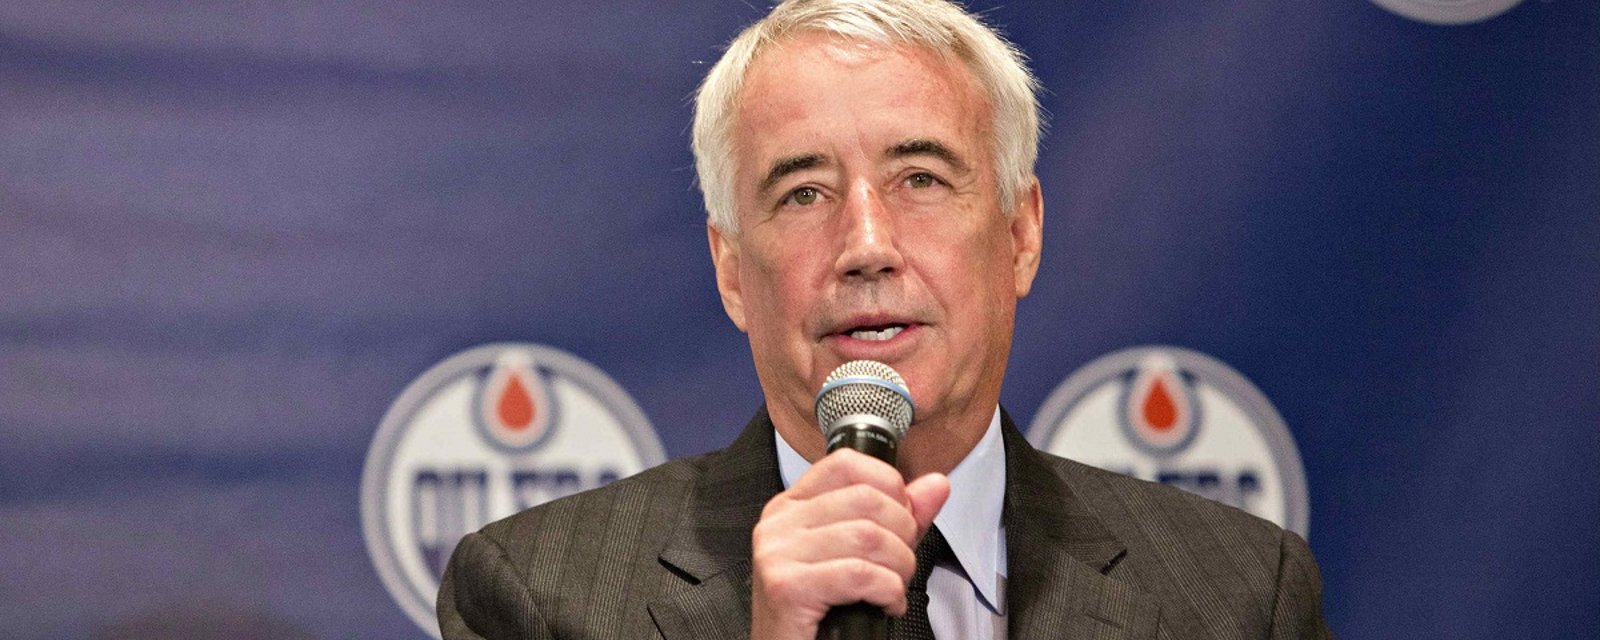 More and more signs point to Oilers hire another member of the “Old Boys Club.”